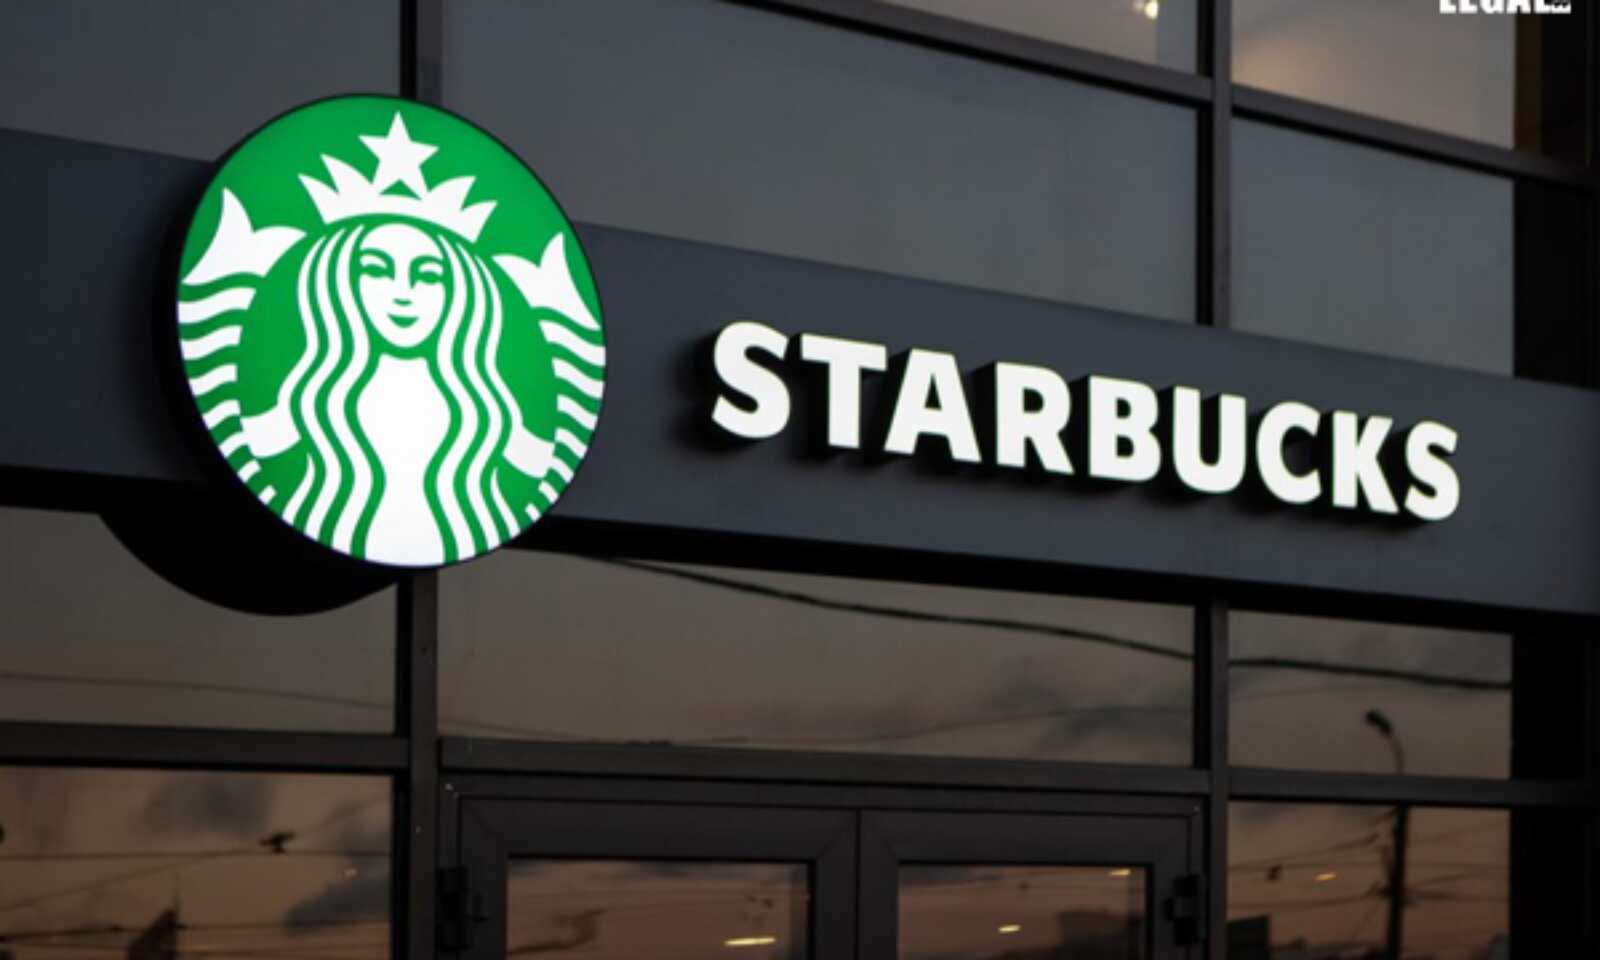 delhi high court awards damages and legal cost to starbucks over frappuccino